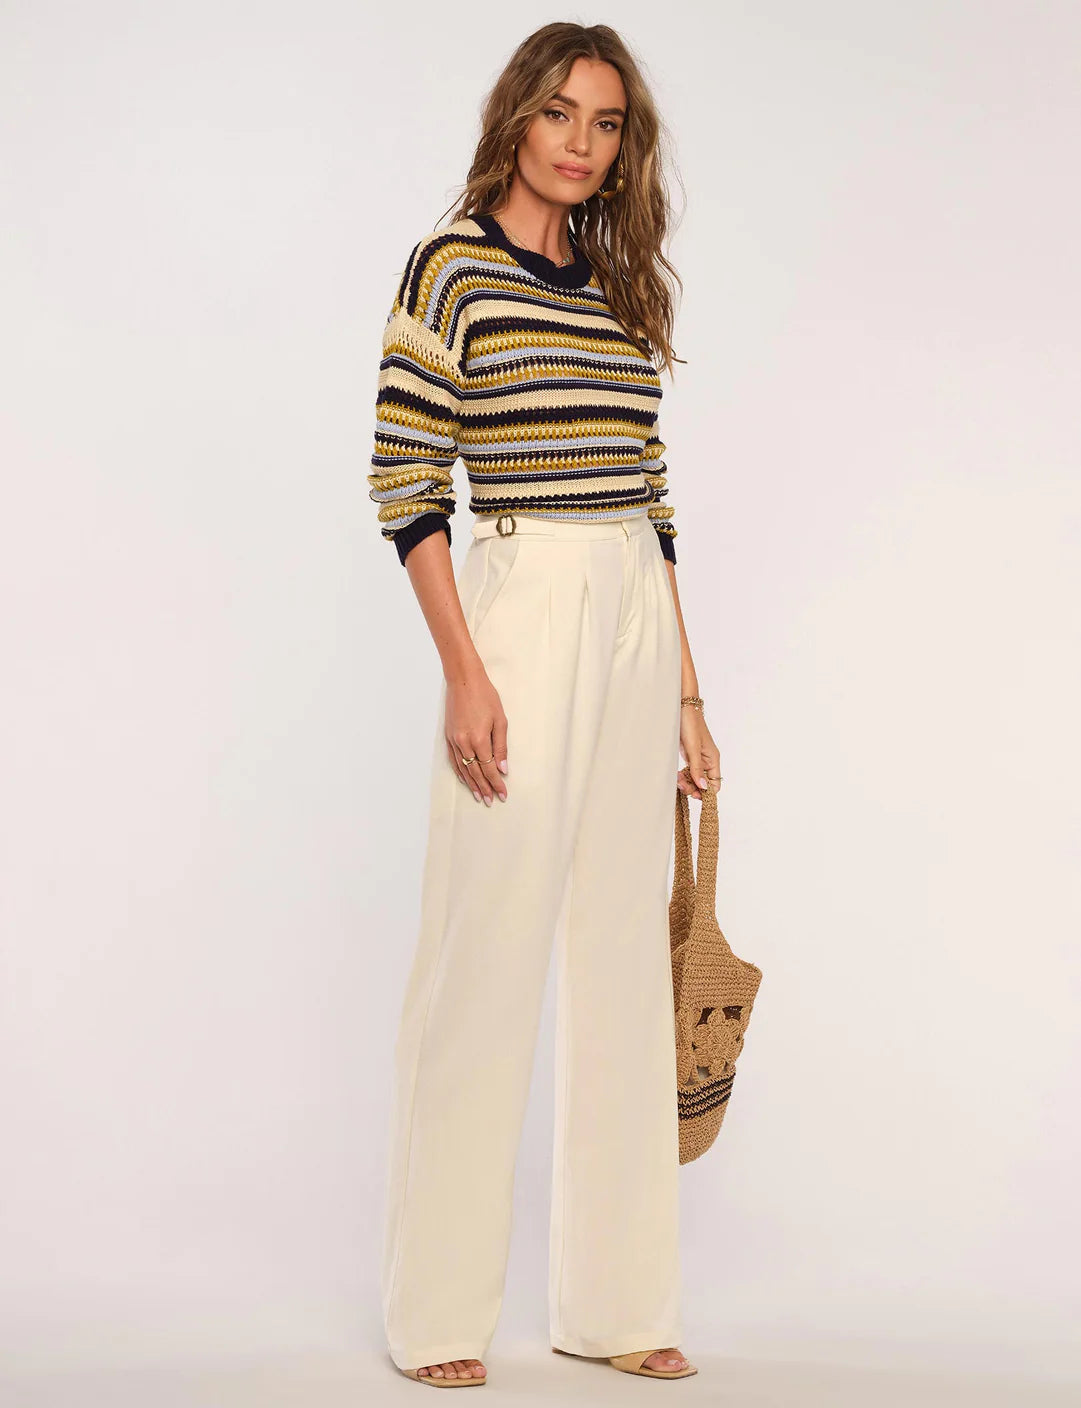 Heartloom Lucca Pant in Ivory